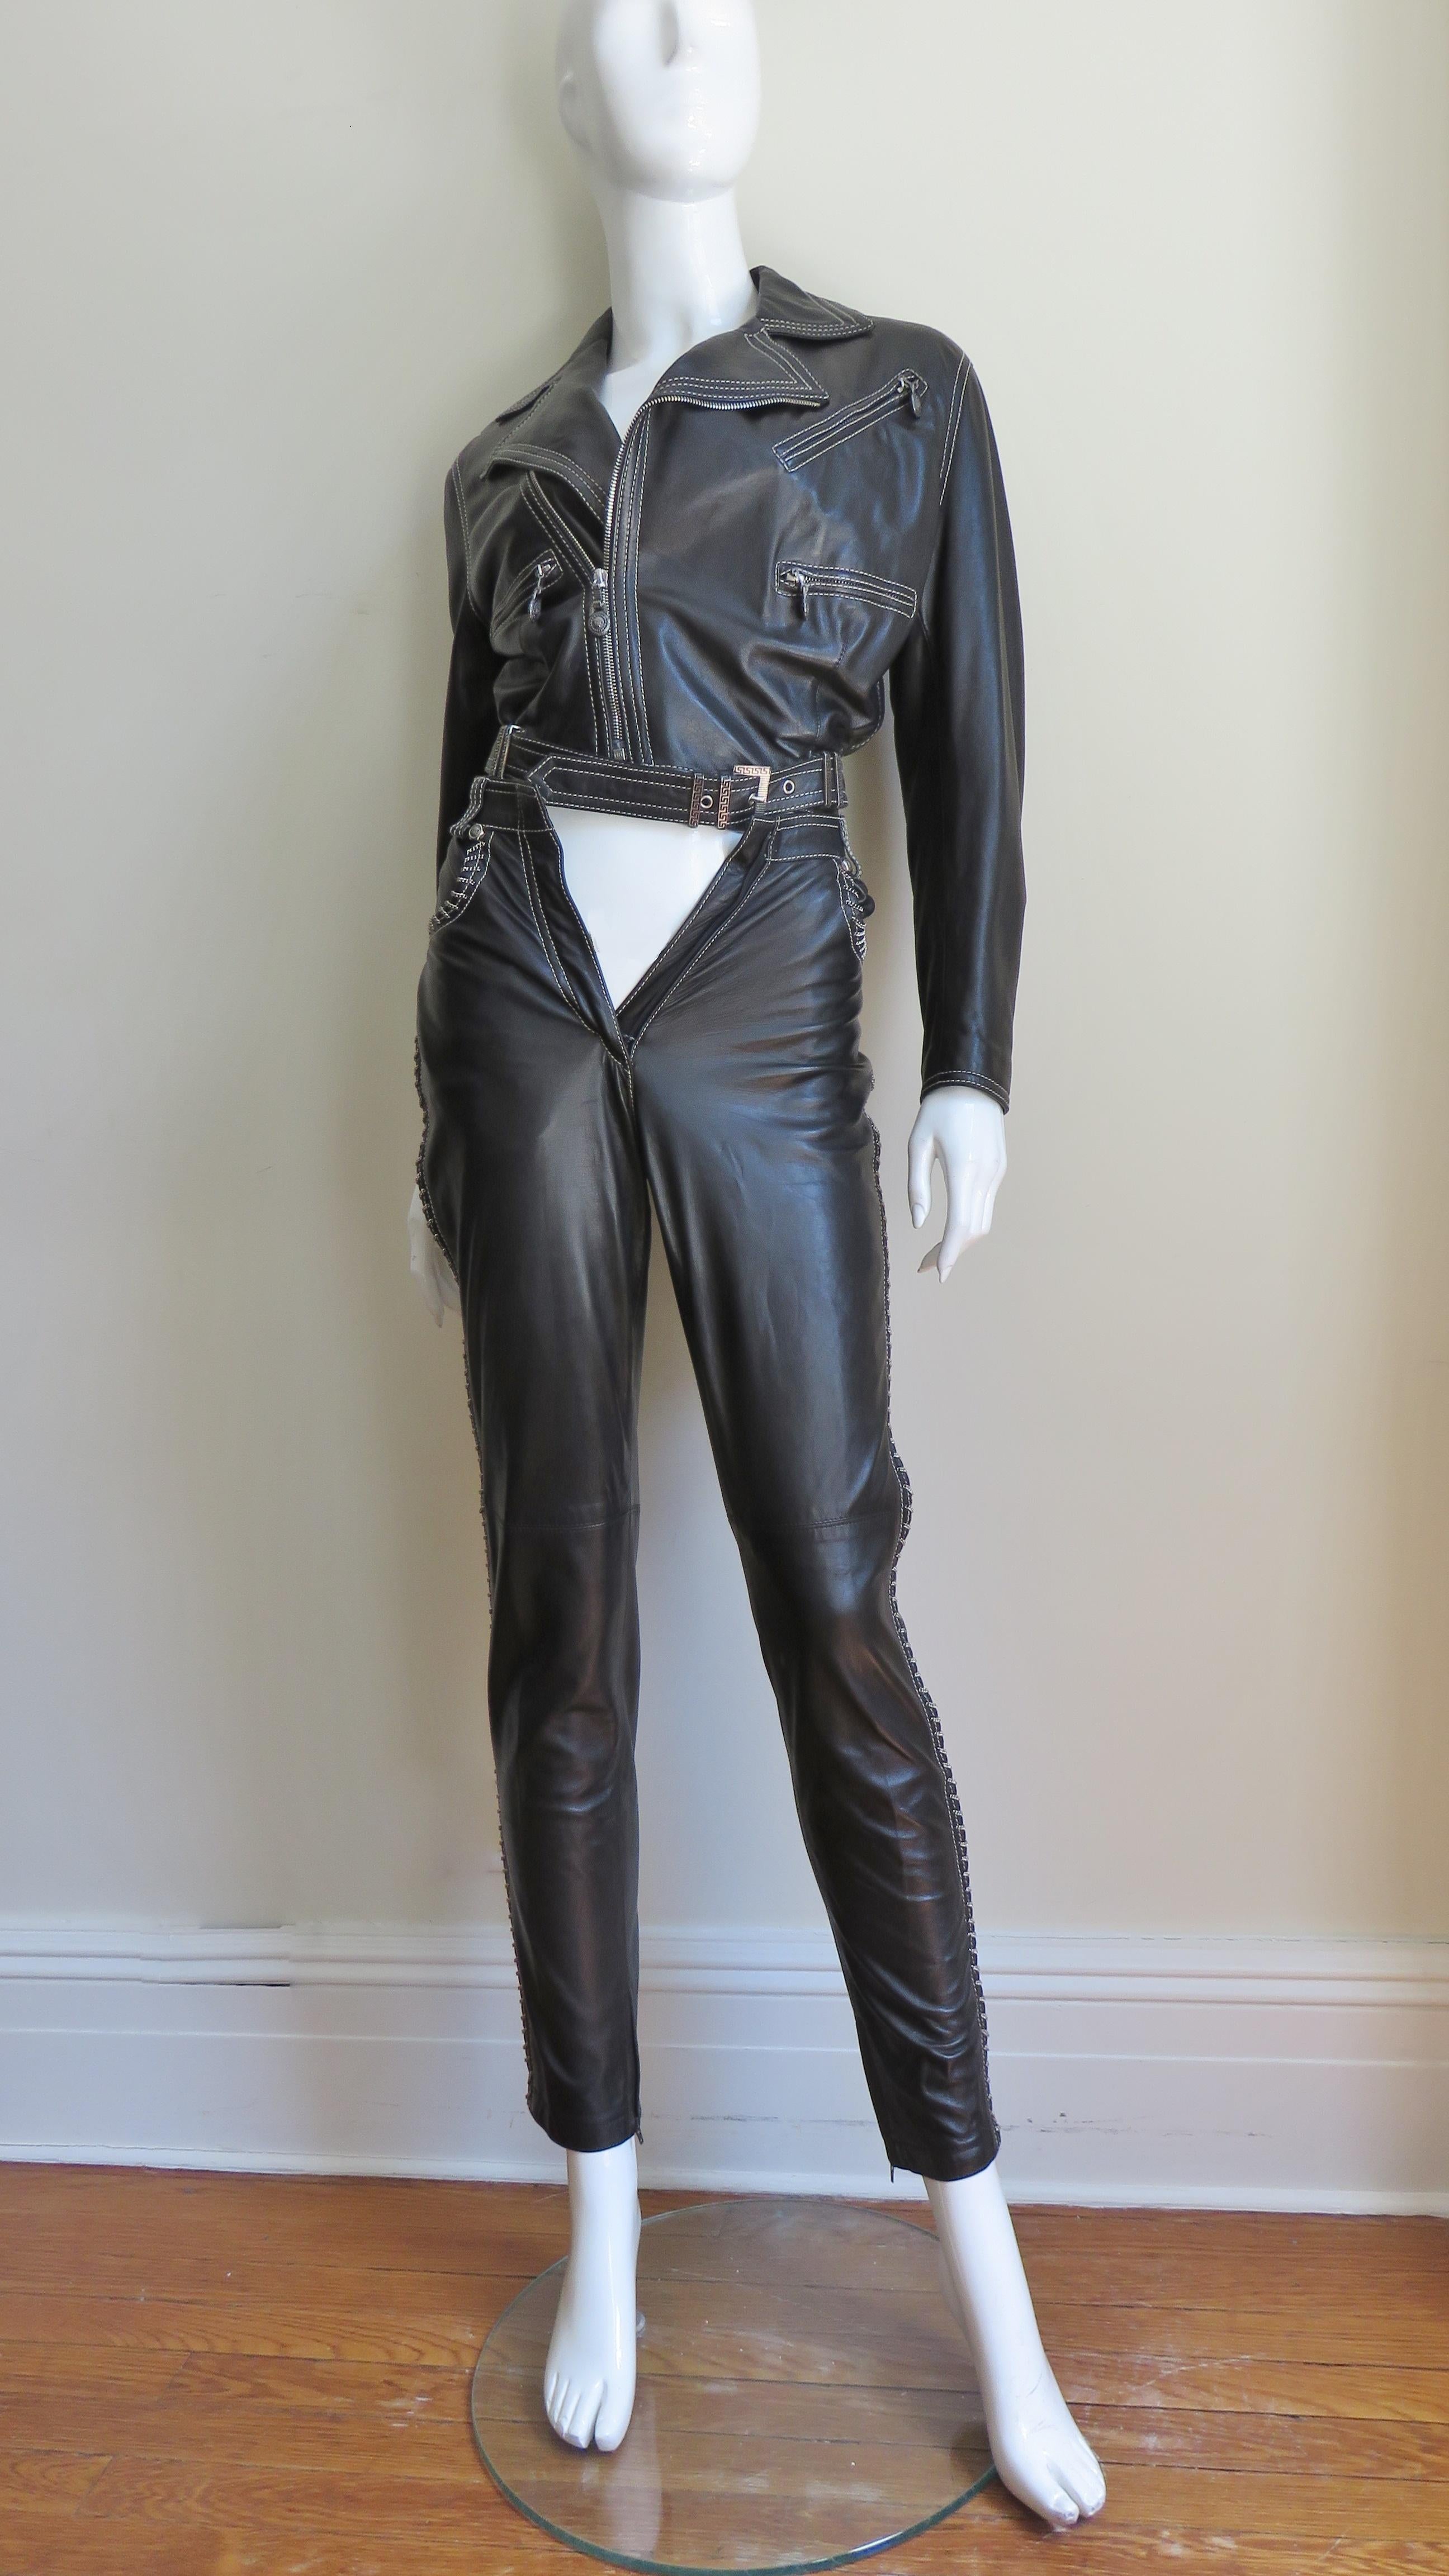  Gianni Versace A/W 1992 Leather Motorcycle Jacket and Pants With Chain Trim  For Sale 5